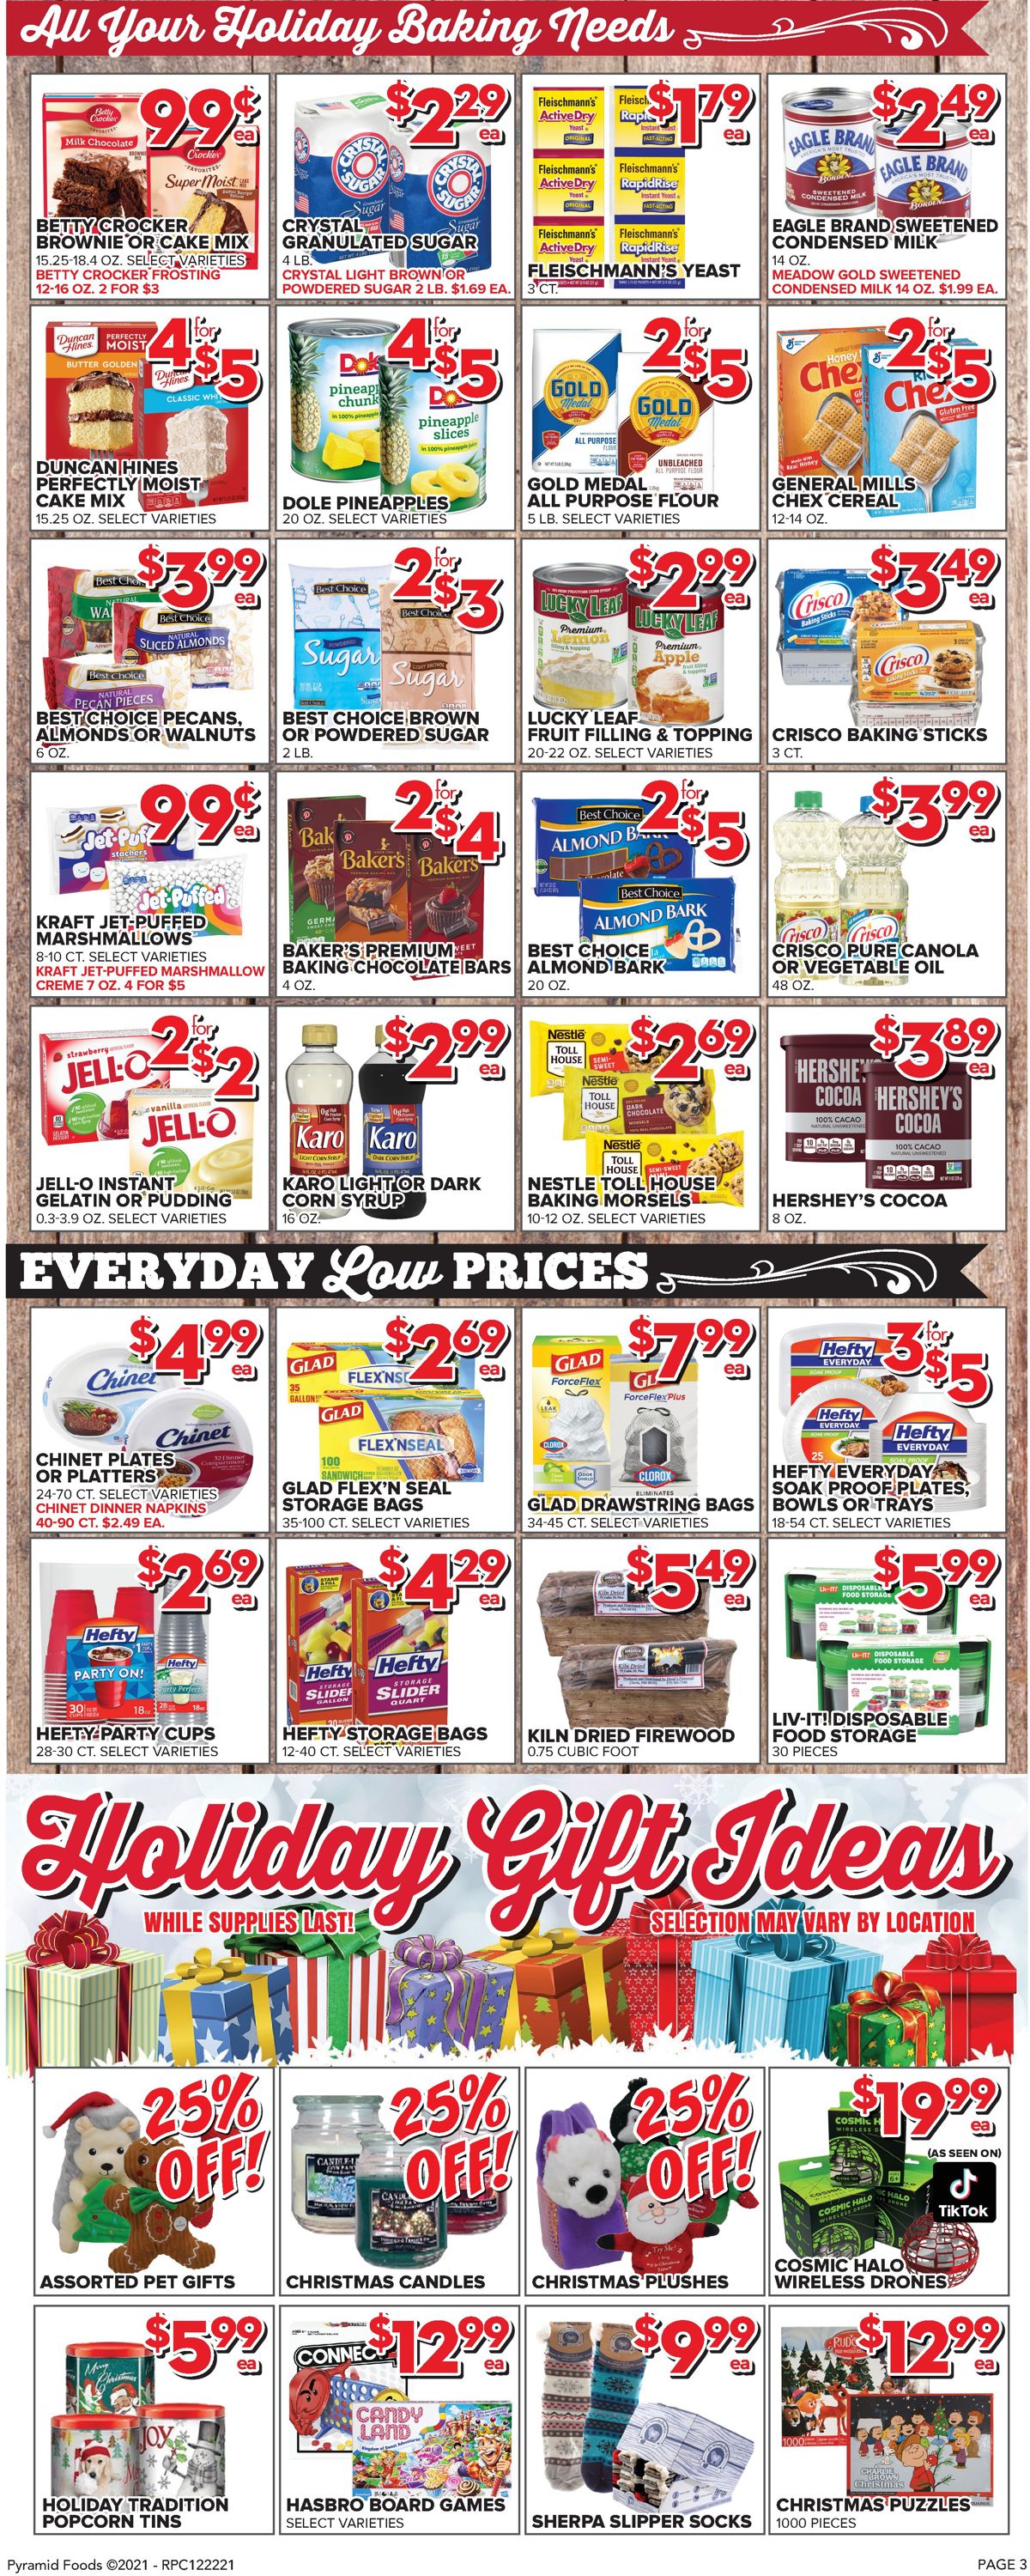 Price Cutter CHRISTMAS 2021 Weekly Ad Circular - valid 12/22-12/28/2021 (Page 3)